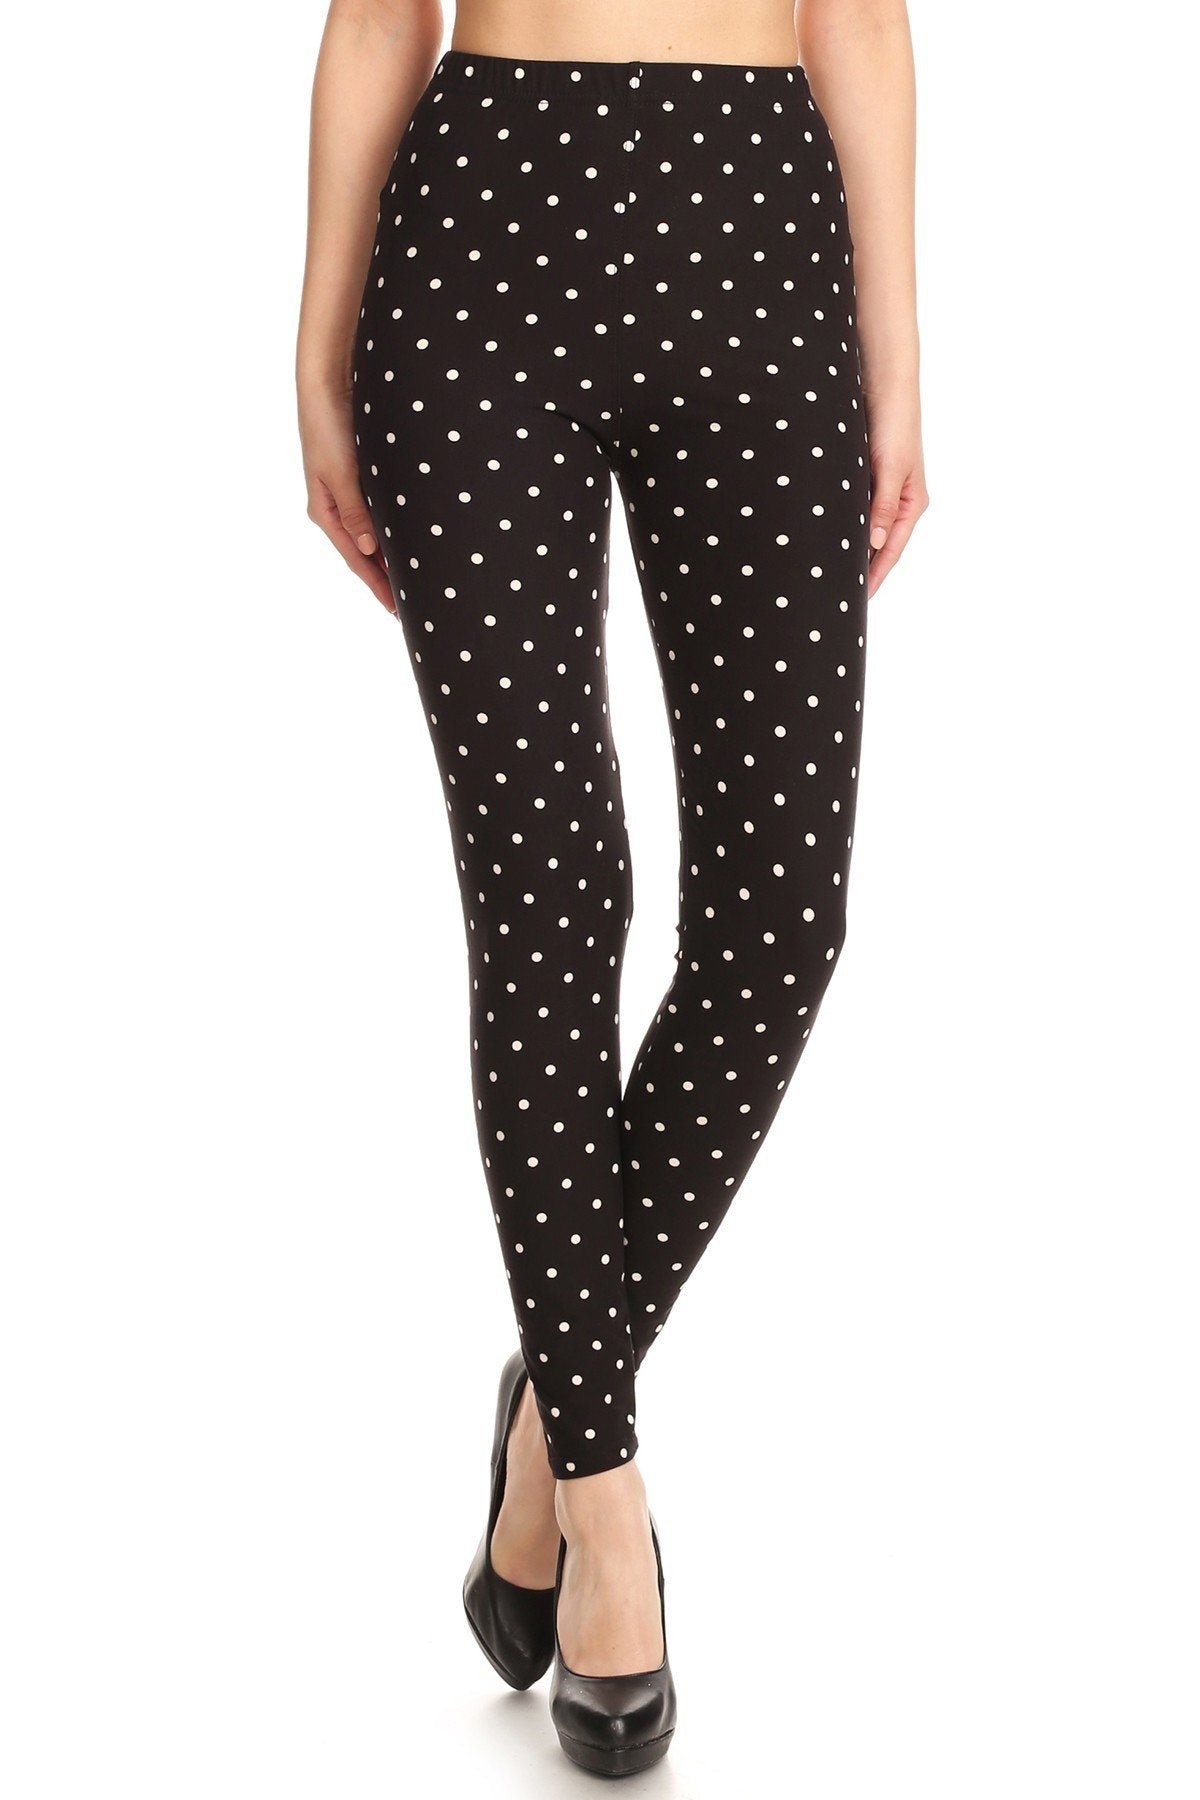 High Waisted Leggings With An Elastic Band In A White Polka Dot Print Over A Black Background